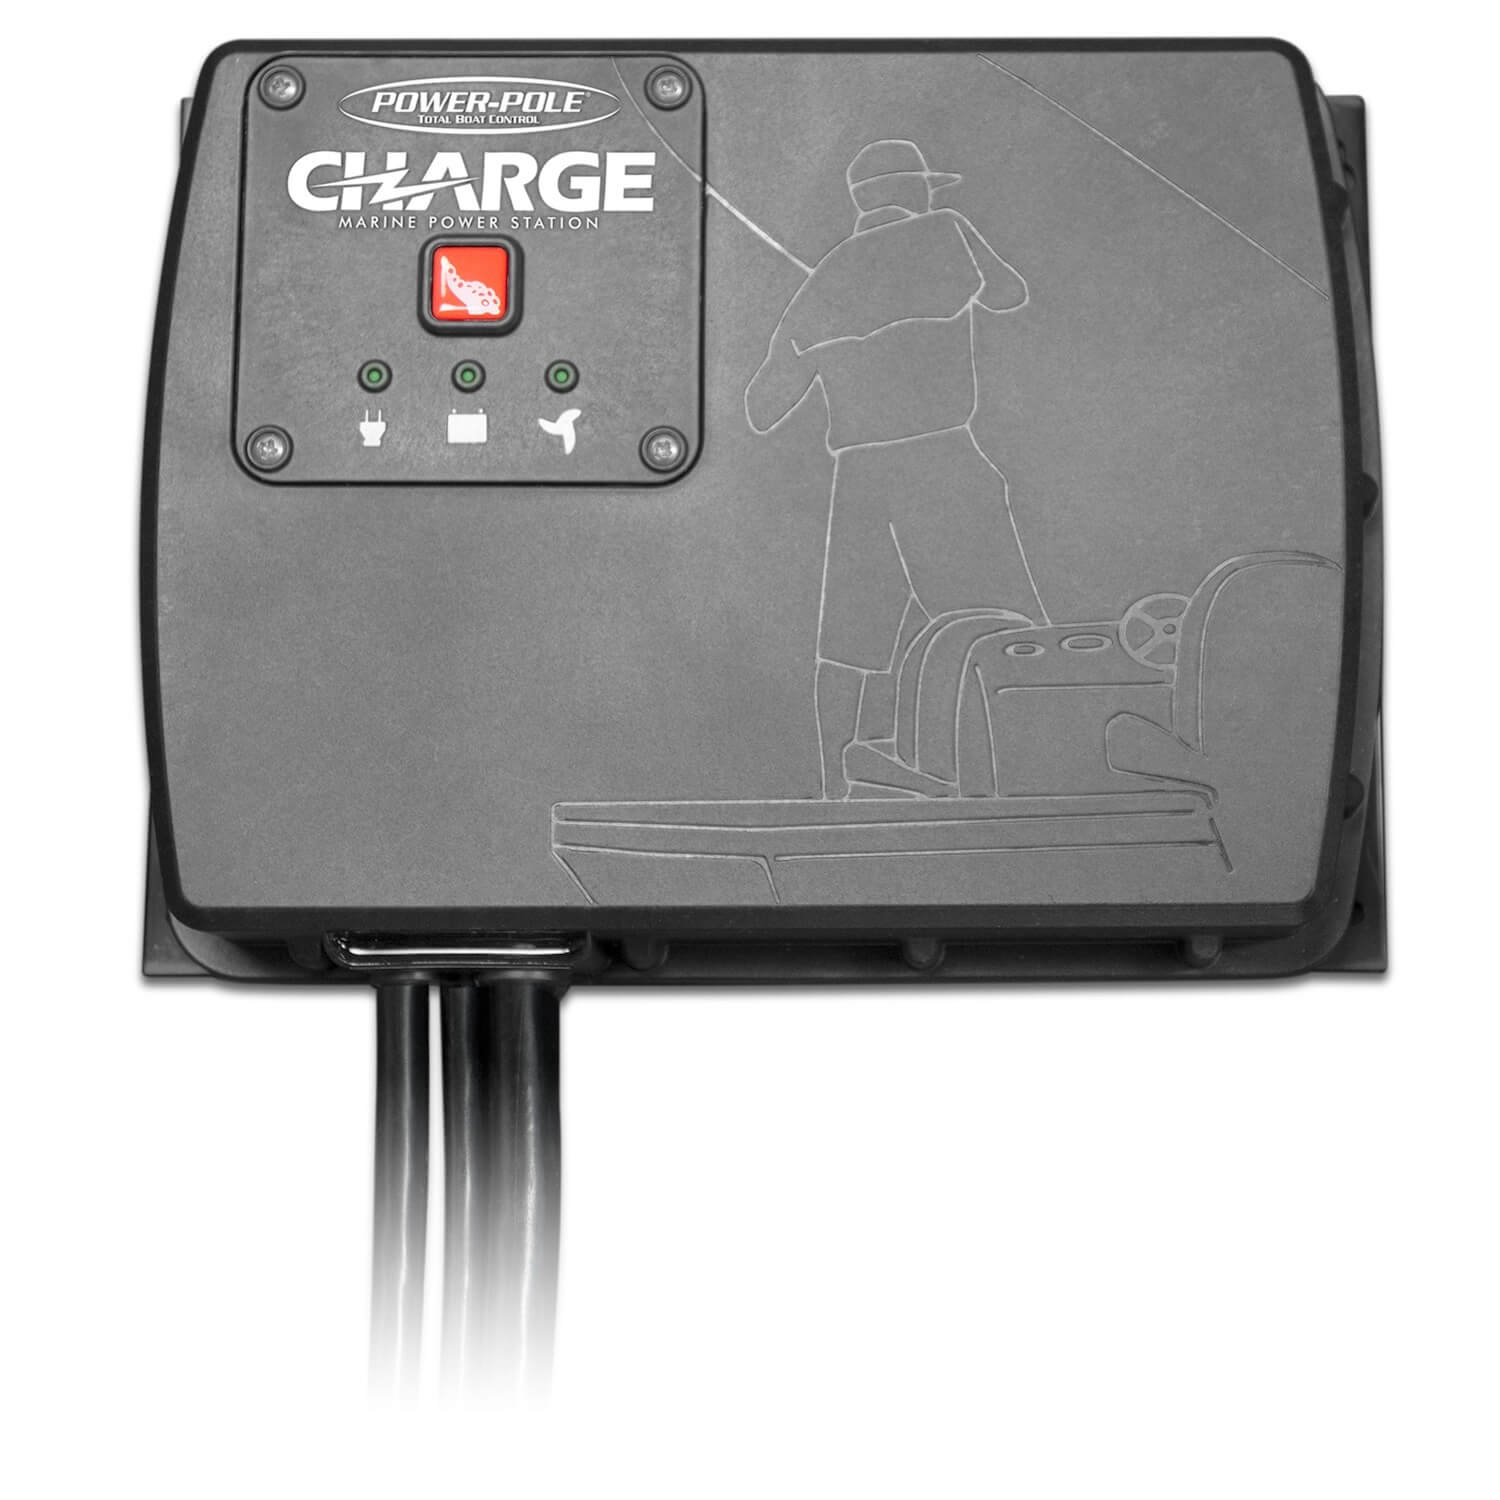 Front view of Power-pole charge - premium battery charger